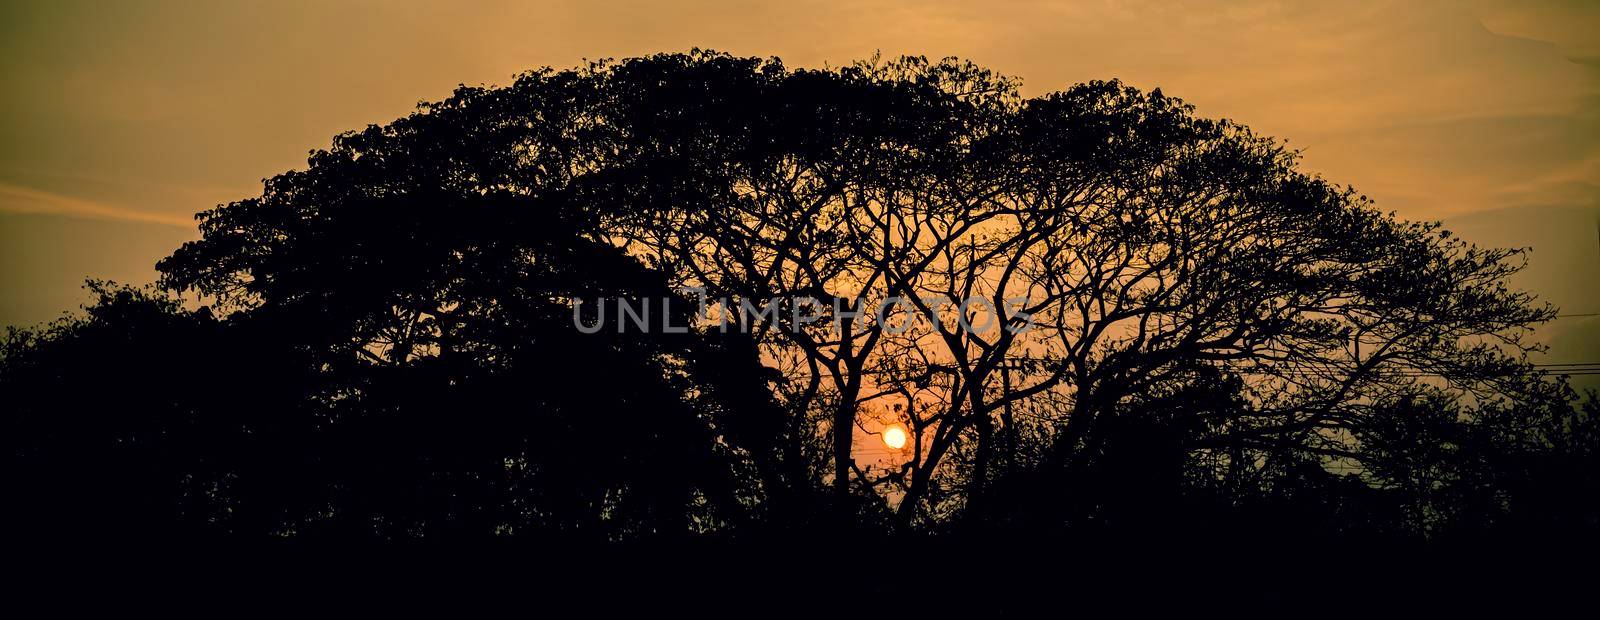 tree silhouette at sunset . kBig tree silhouette on sunset background